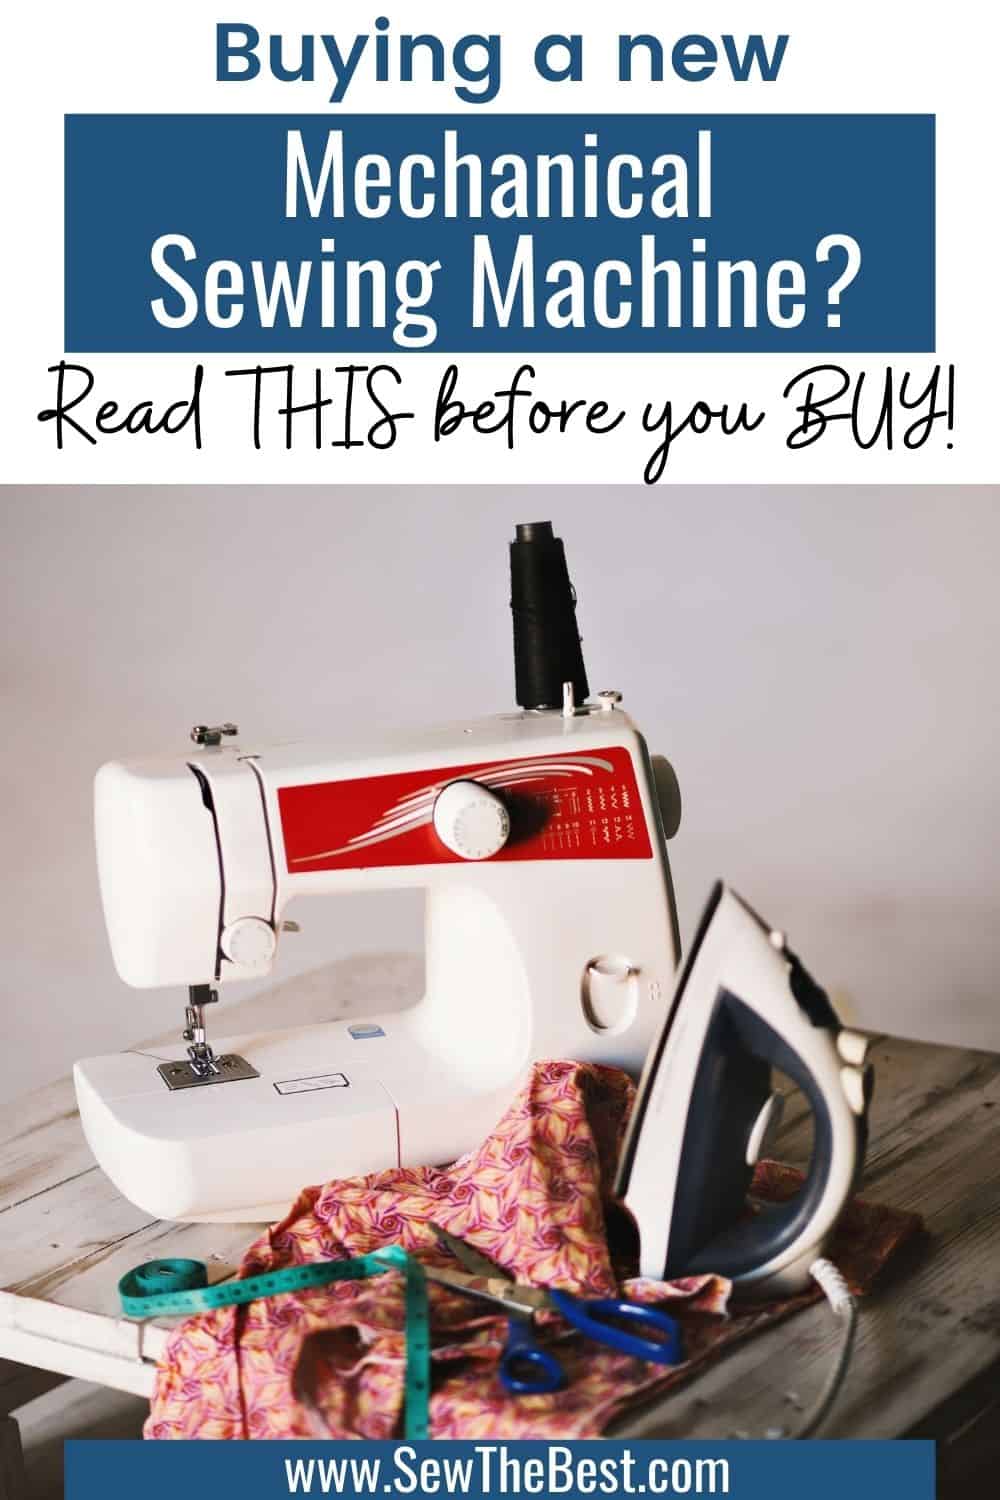 Buying a new Mechanical Sewing Machine? Read THIS before you BUY! Make sure you are getting the right mechanical sewing machine for you. Sewing machine for beginners, quilting machine, industrial sewing machine #sewing #ad #sewingMachine